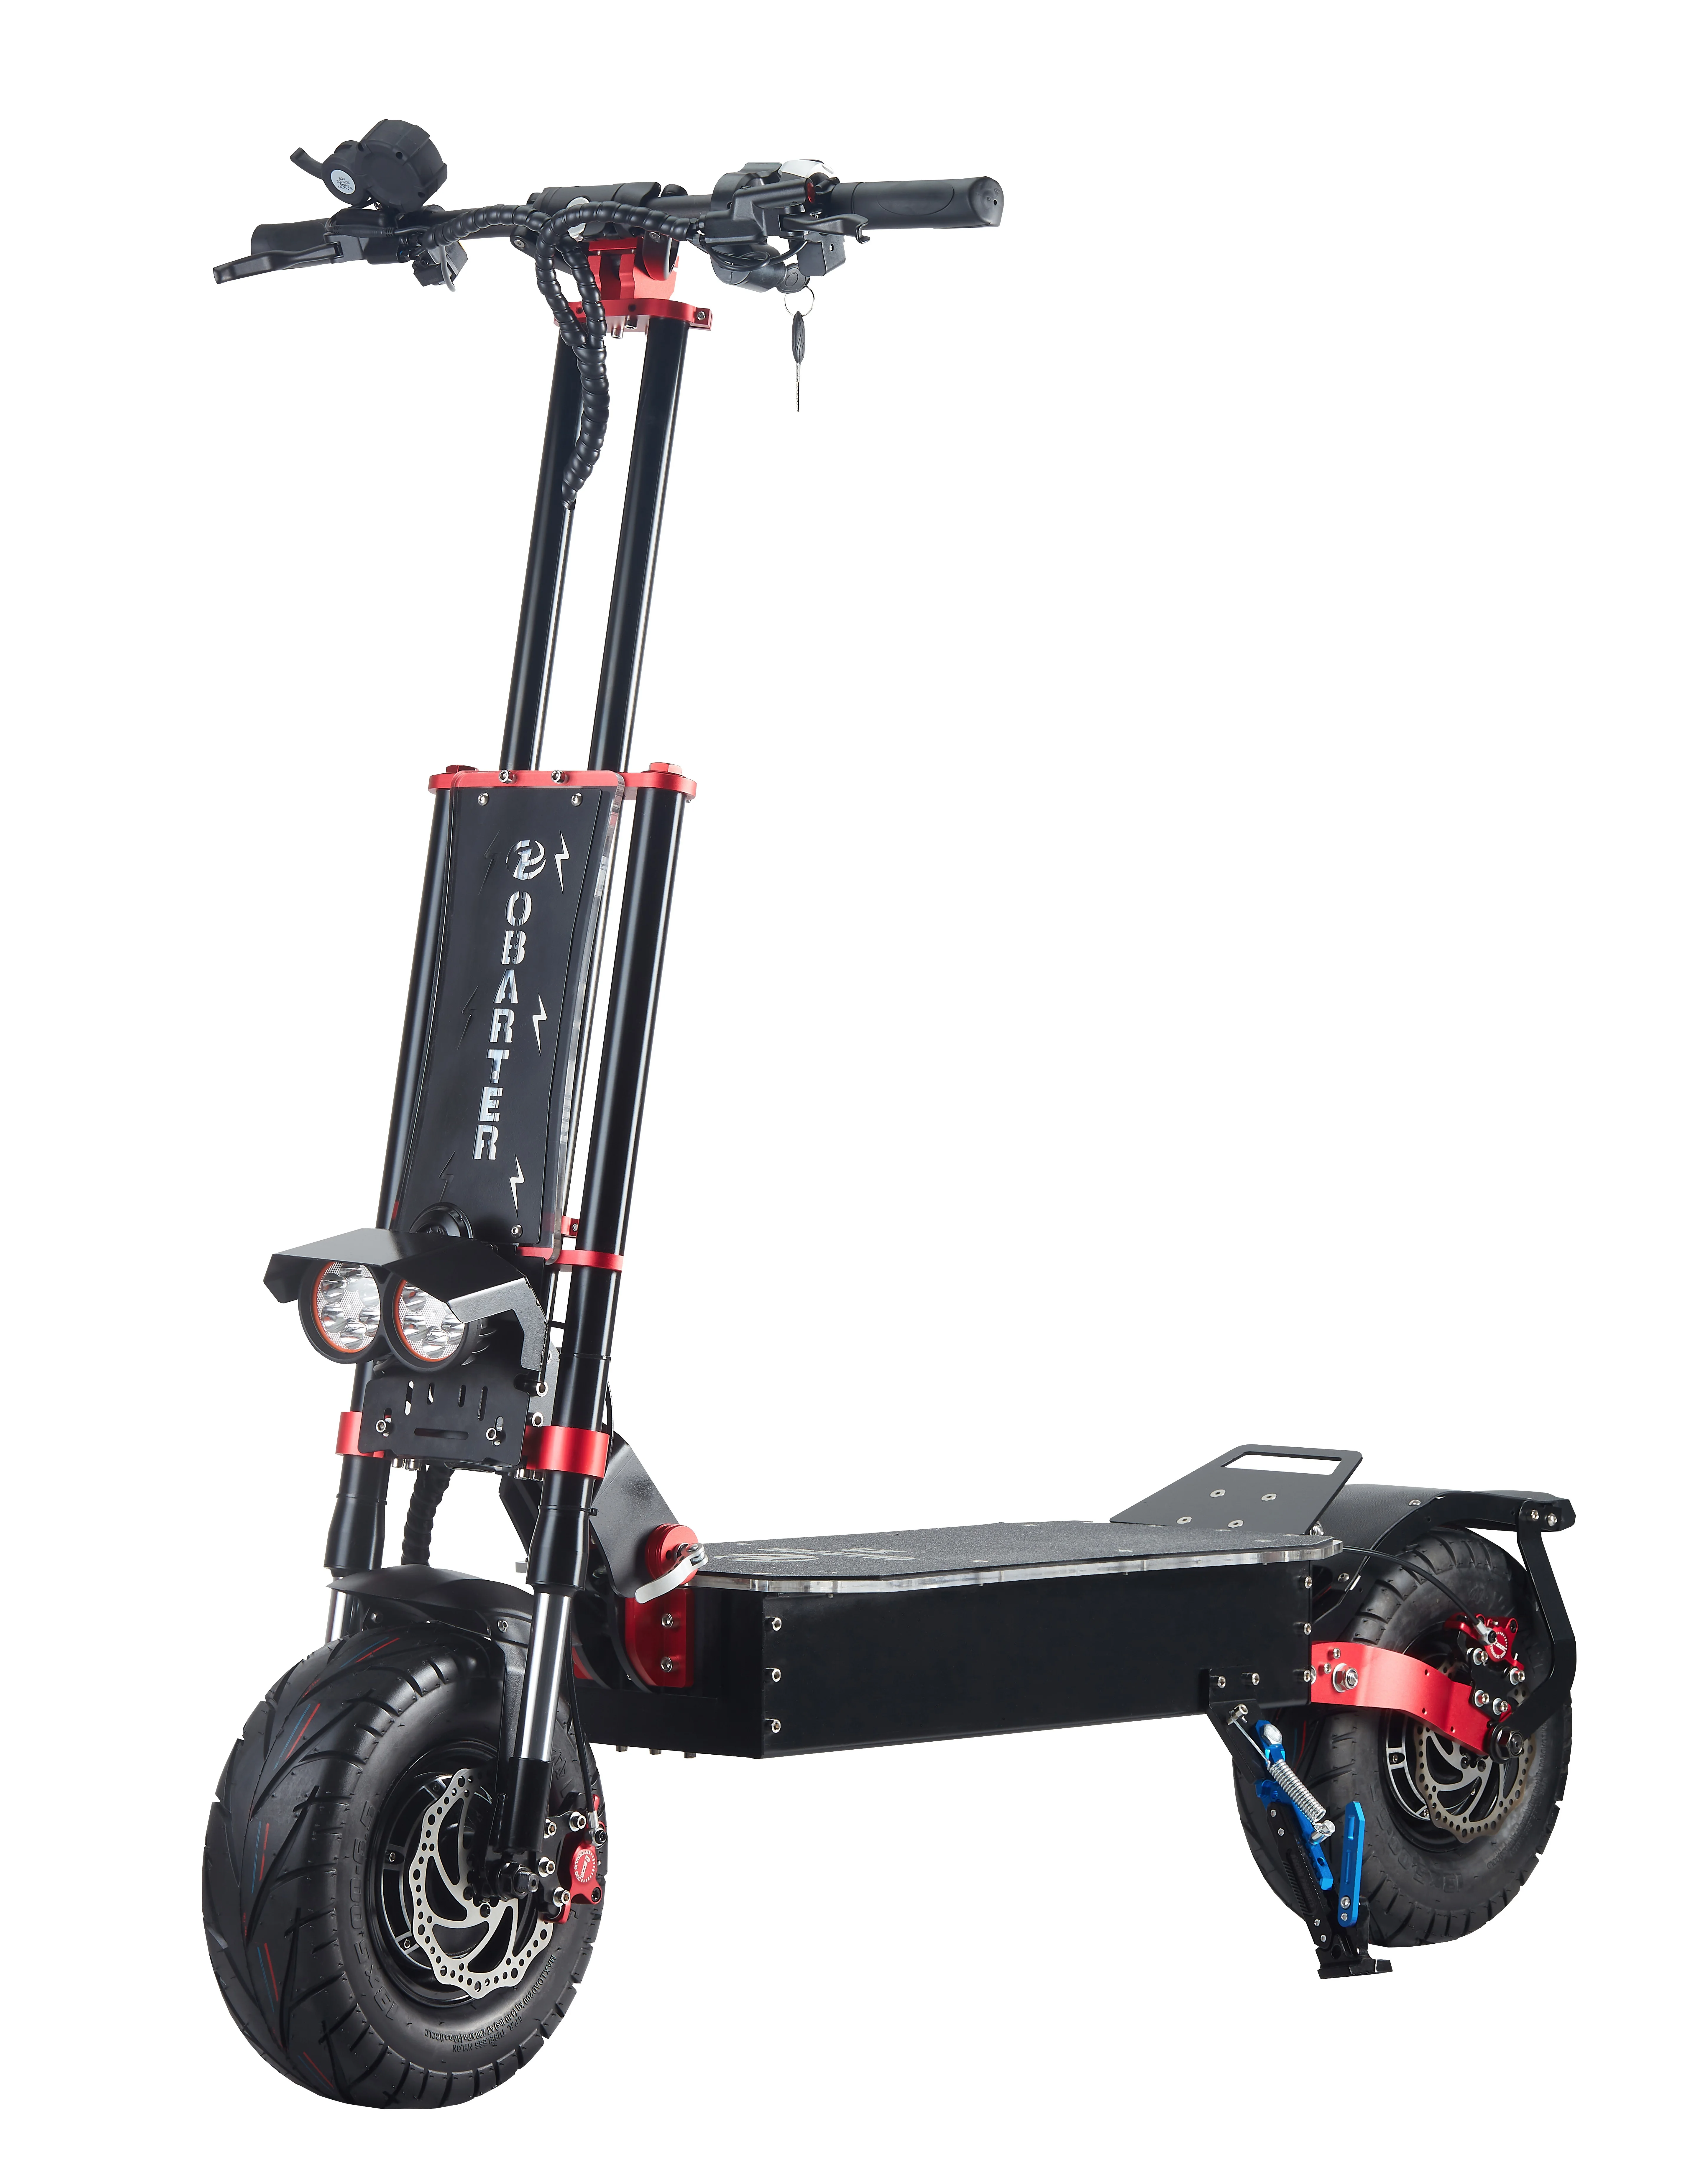 

Eu Uk warehouse OBARTER X5 folding big wheels 13 inch 60v 5600w 13ah high speed 85km/h electric scooter for adults